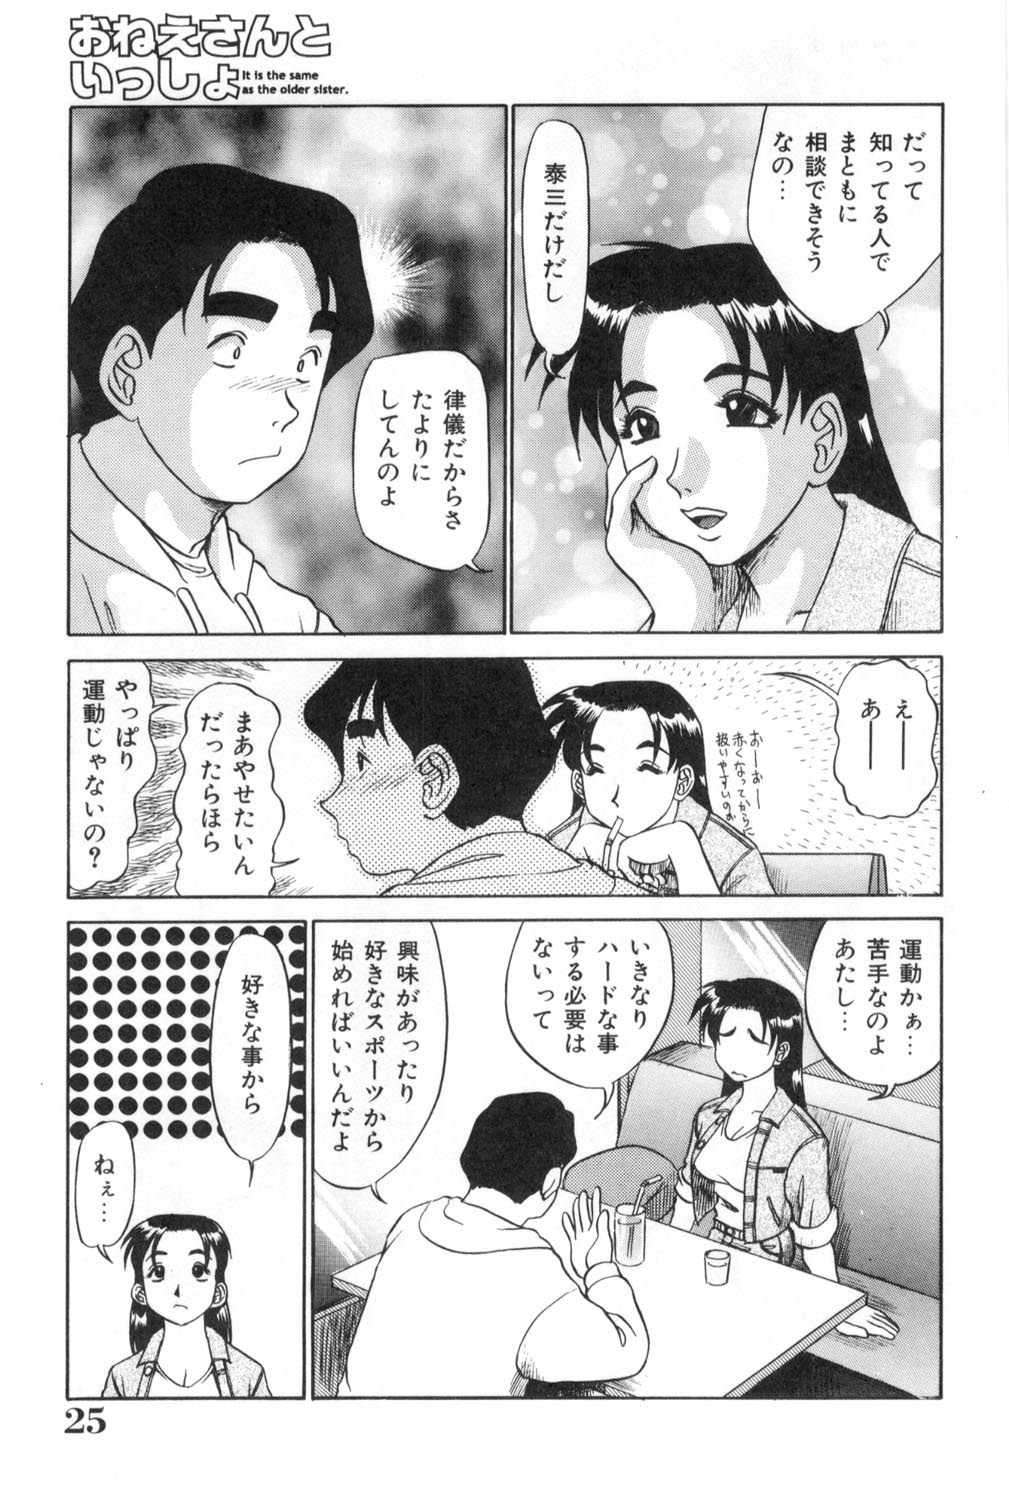 [Koshow Showshow] Oneesan to Issho - It is the same as the older sister. page 25 full